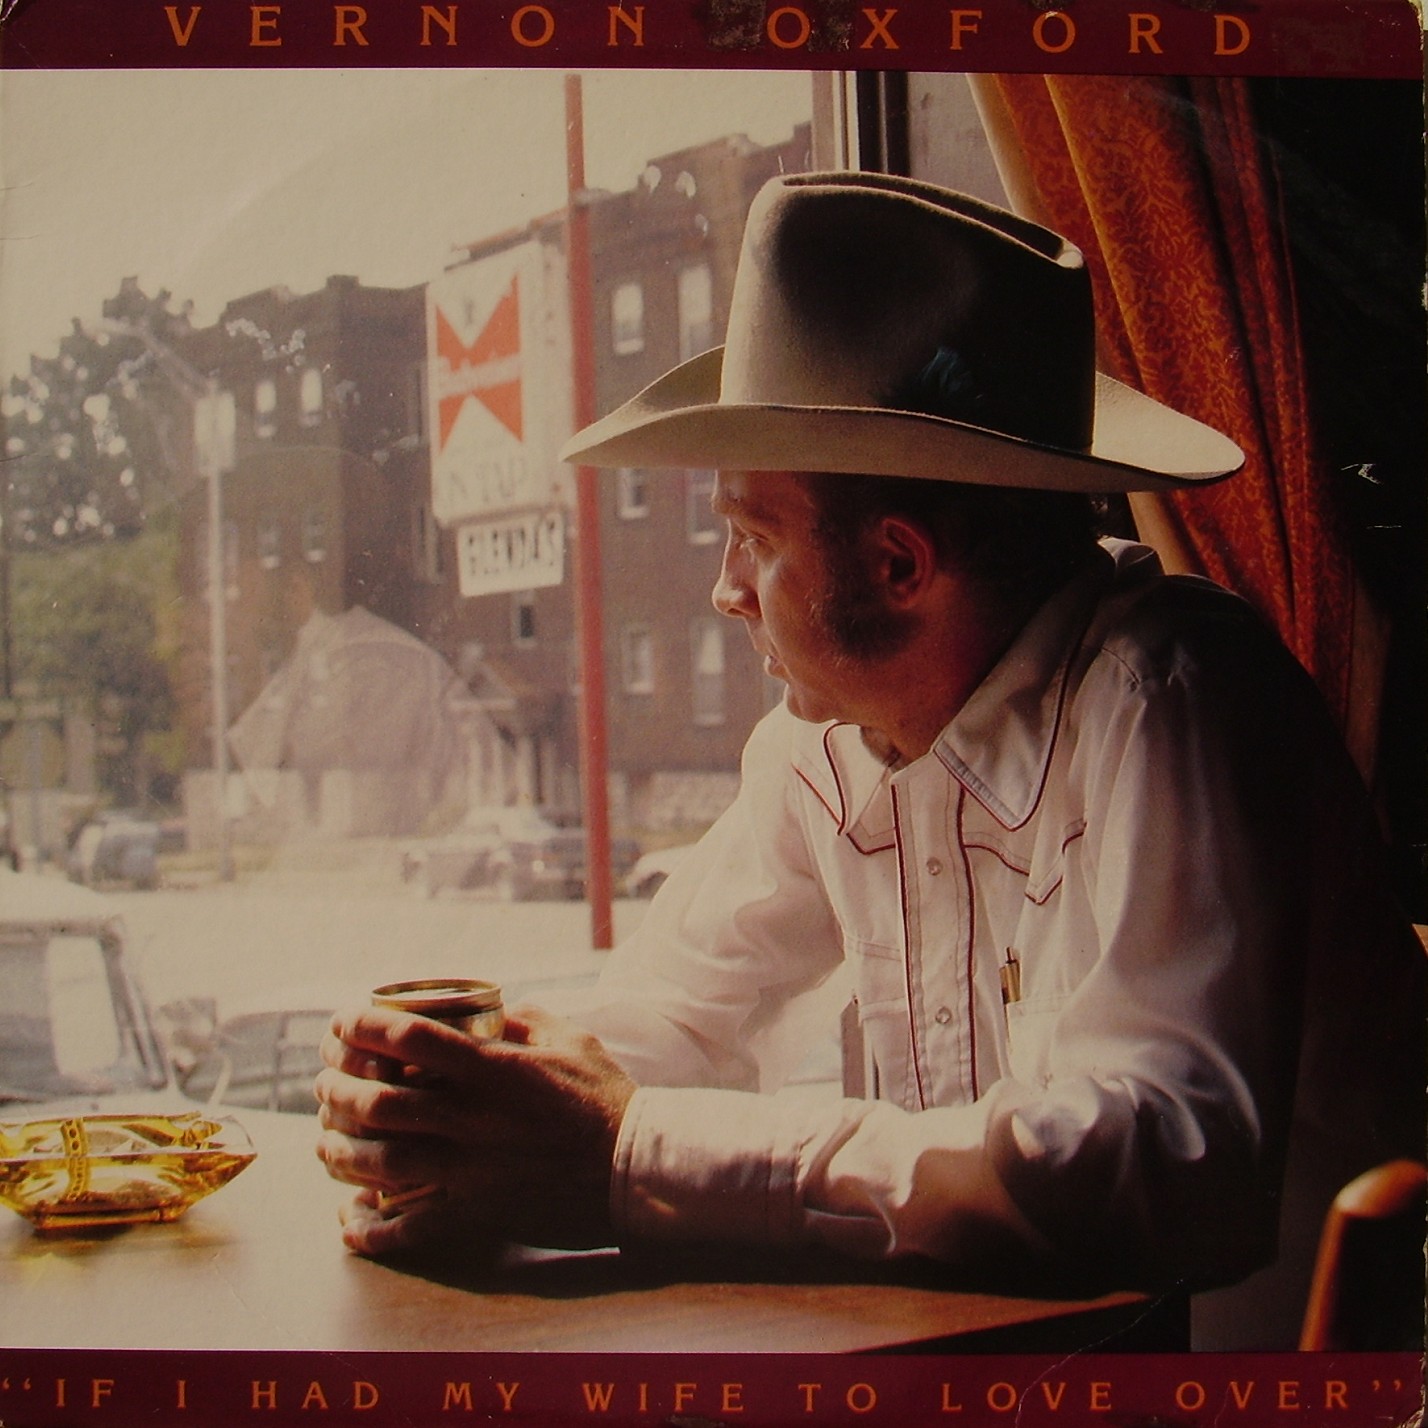 Vernon Oxford - If I Had My Wife To Love Over